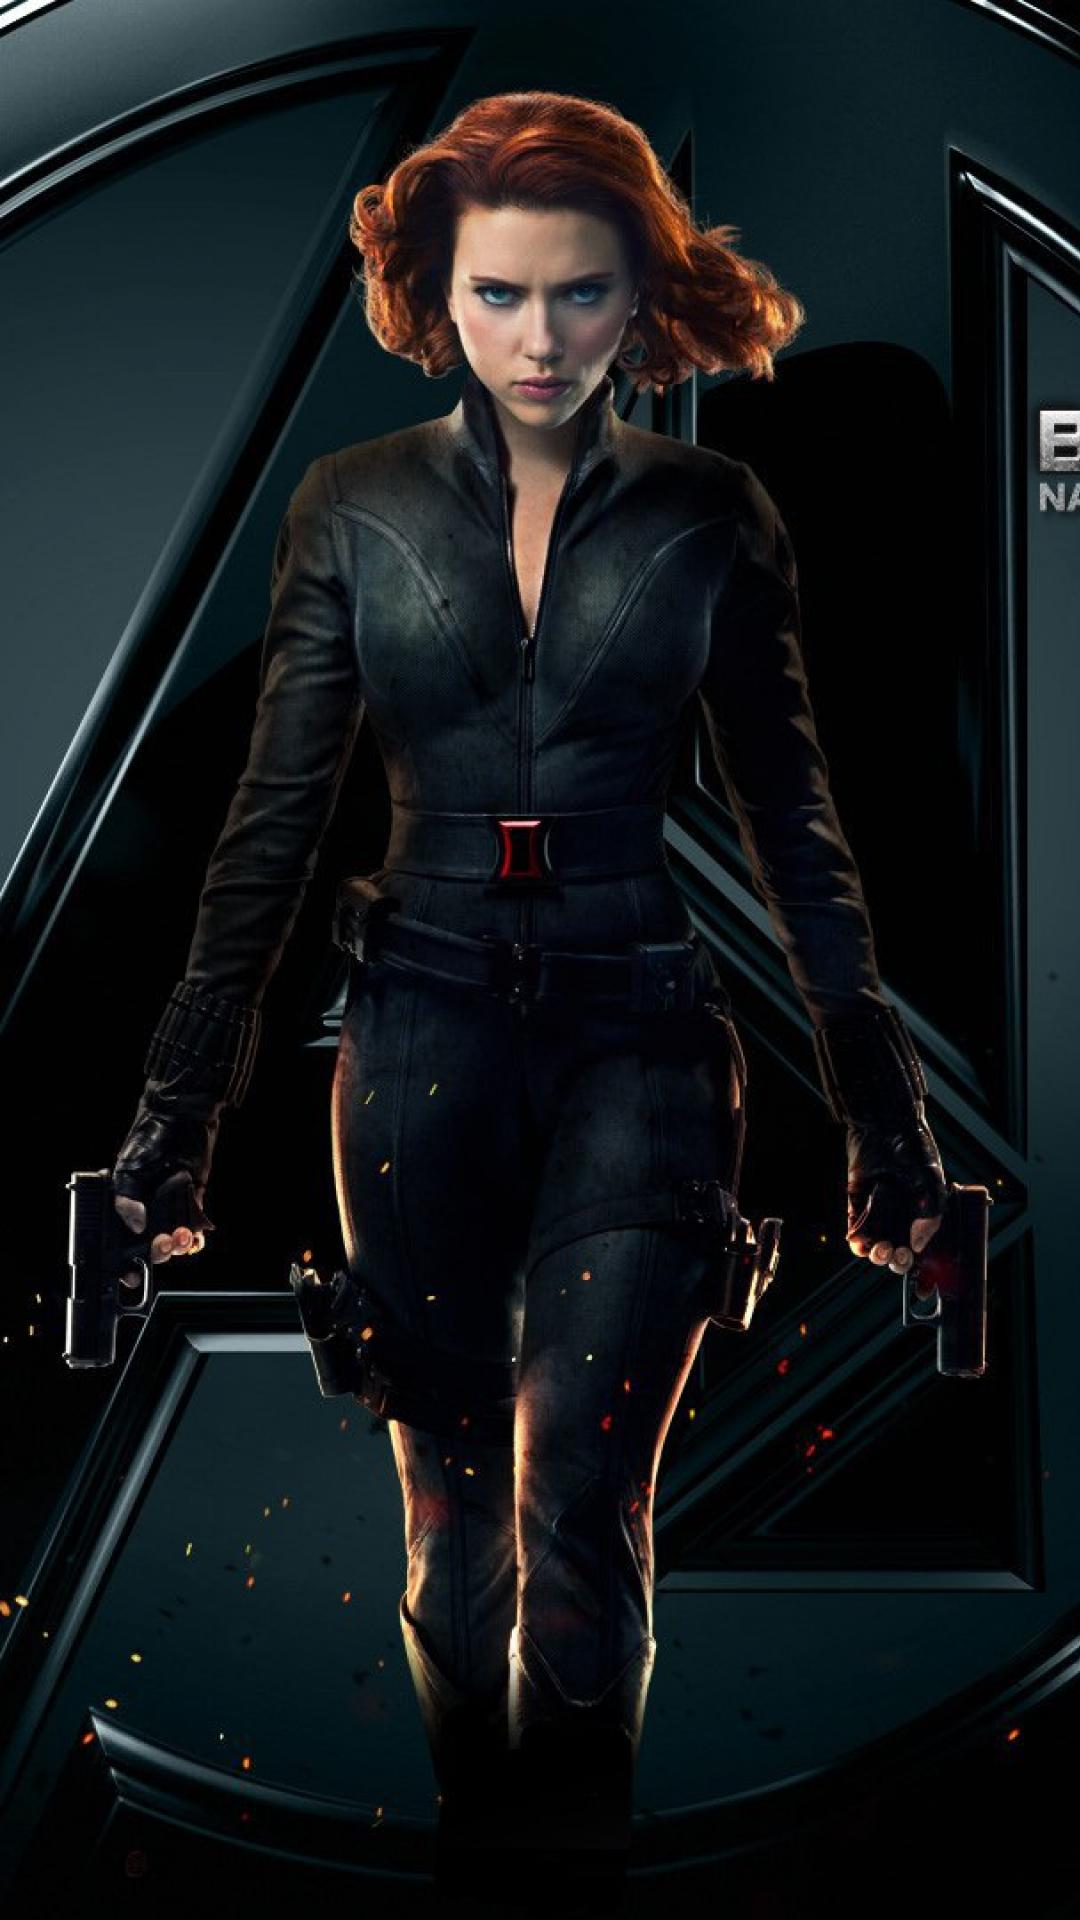 Black Widow HD Android Mobile Wallpapers - Wallpaper Cave